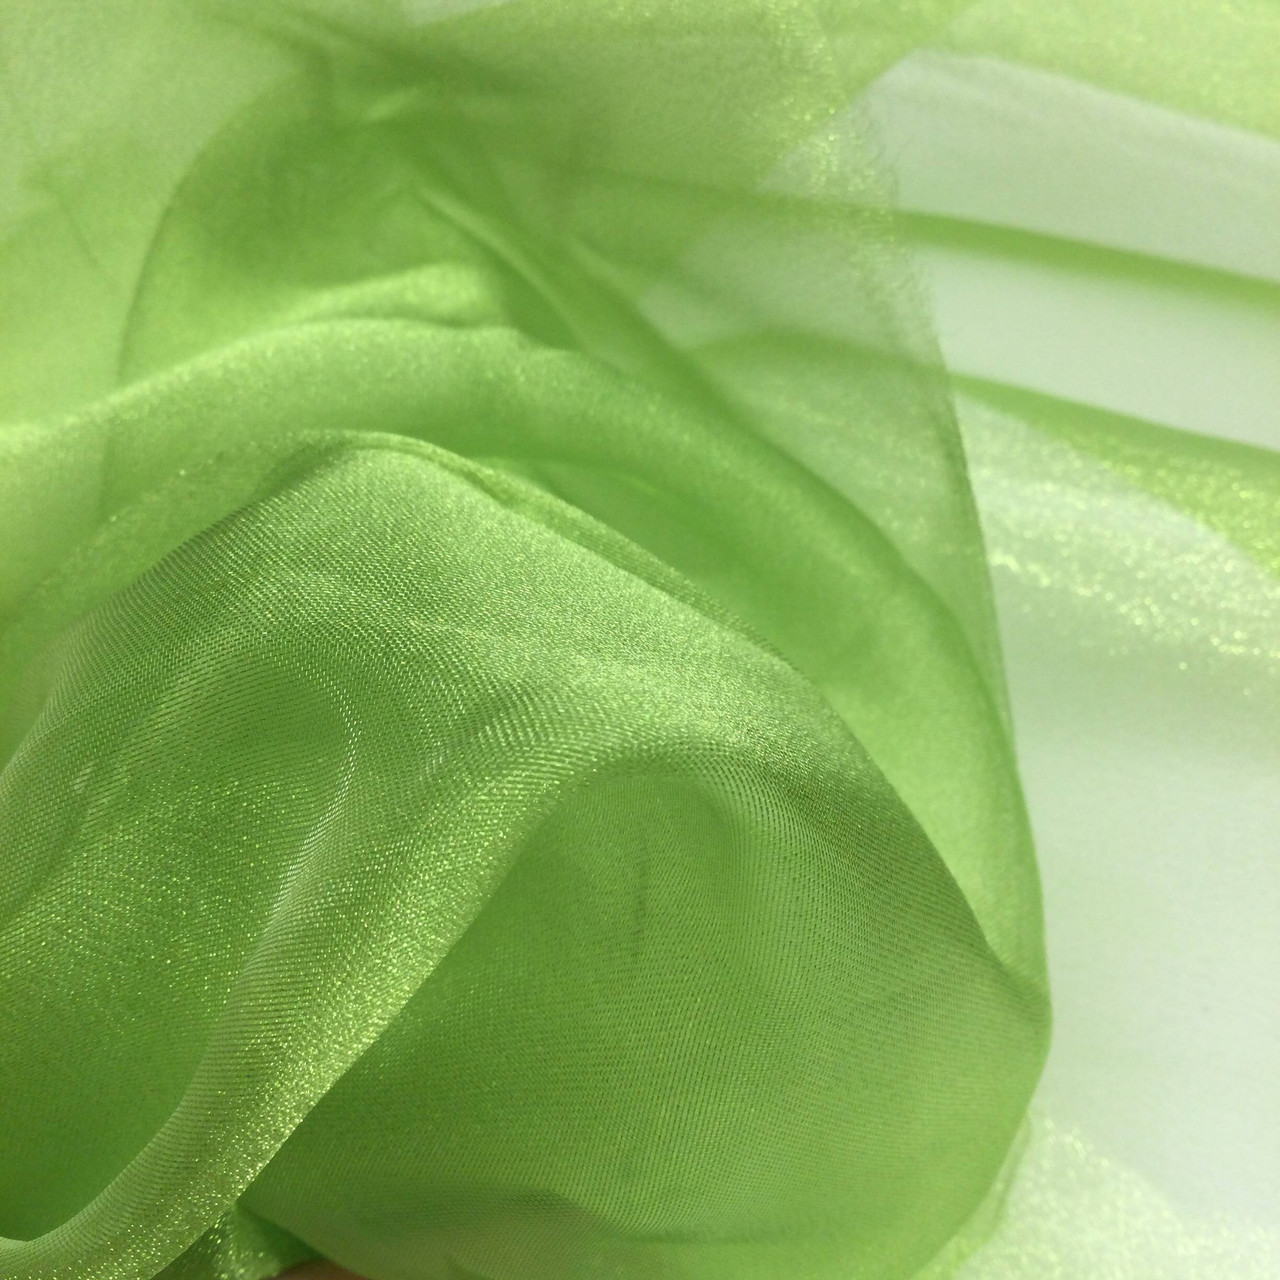 Green Textured Fabric for Sewing Clothes, Fabric Laid Out with Soft Folds  Stock Photo - Image of organza, abstract: 201289010